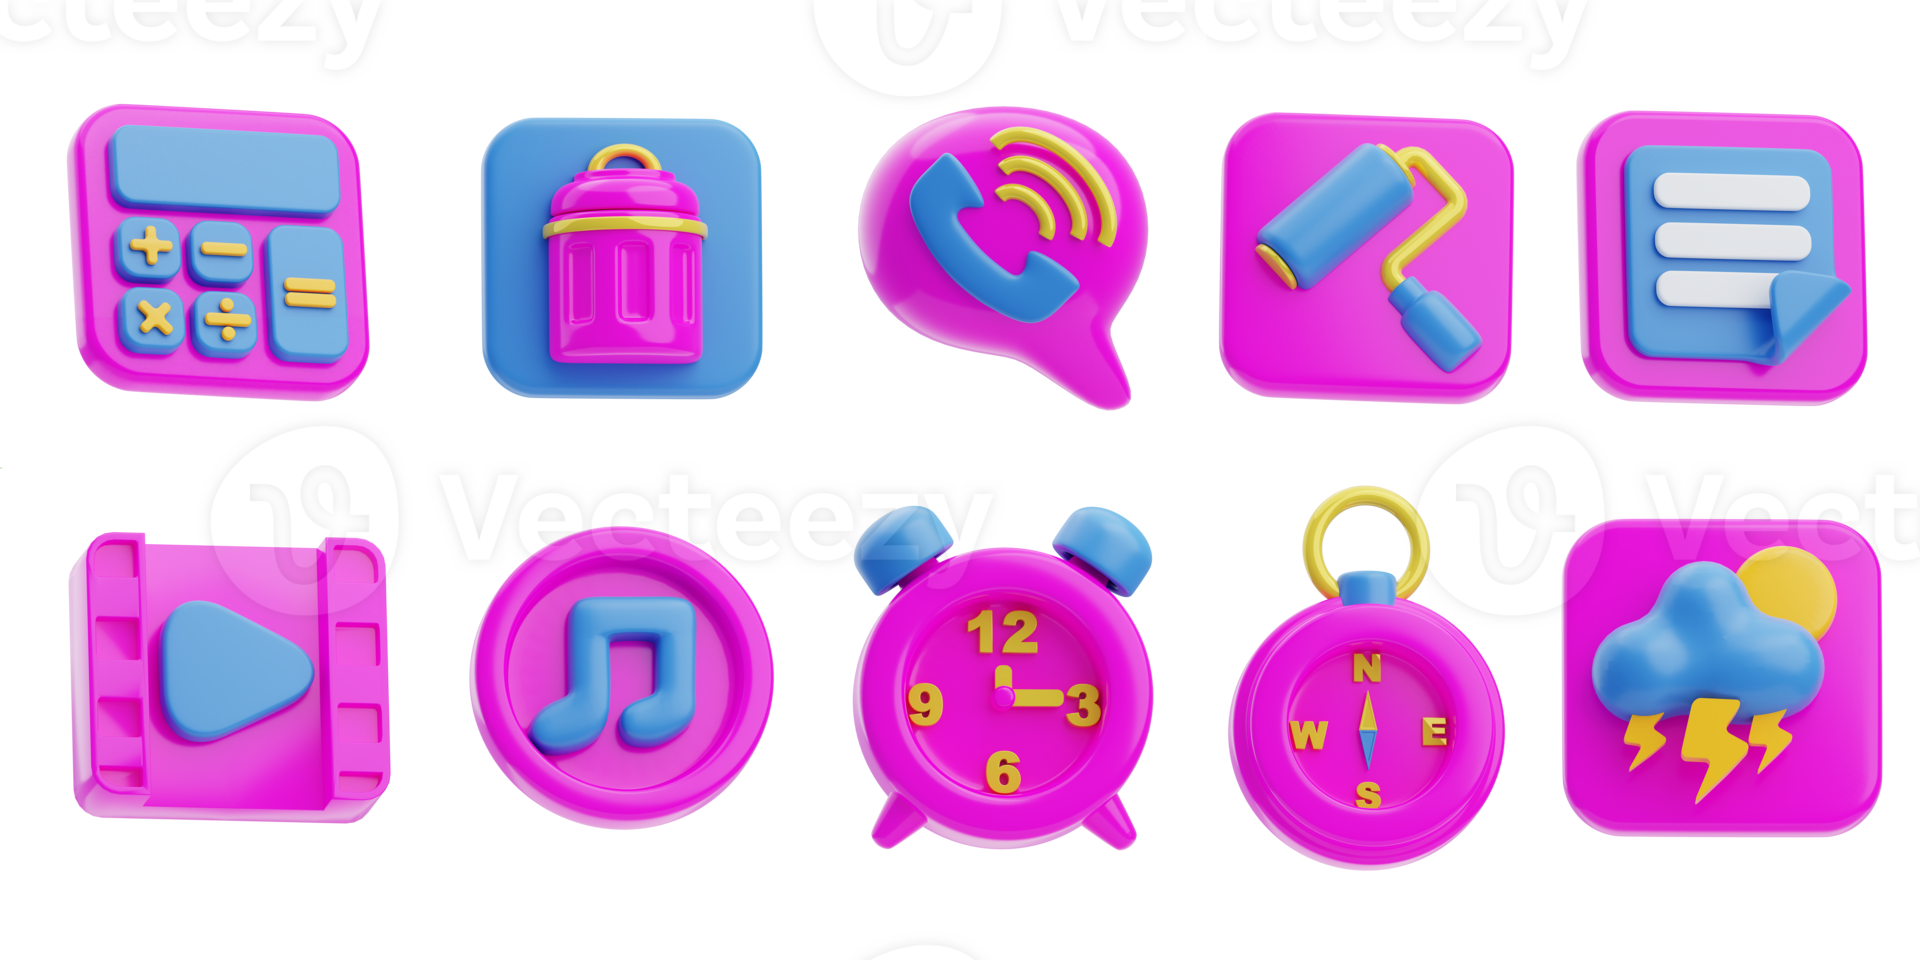 Set of 3d rendering user interface icons for web and mobile applications. Icon calculator, trash, phone call, theme, notes, video player, music player, clock, compass, weather png